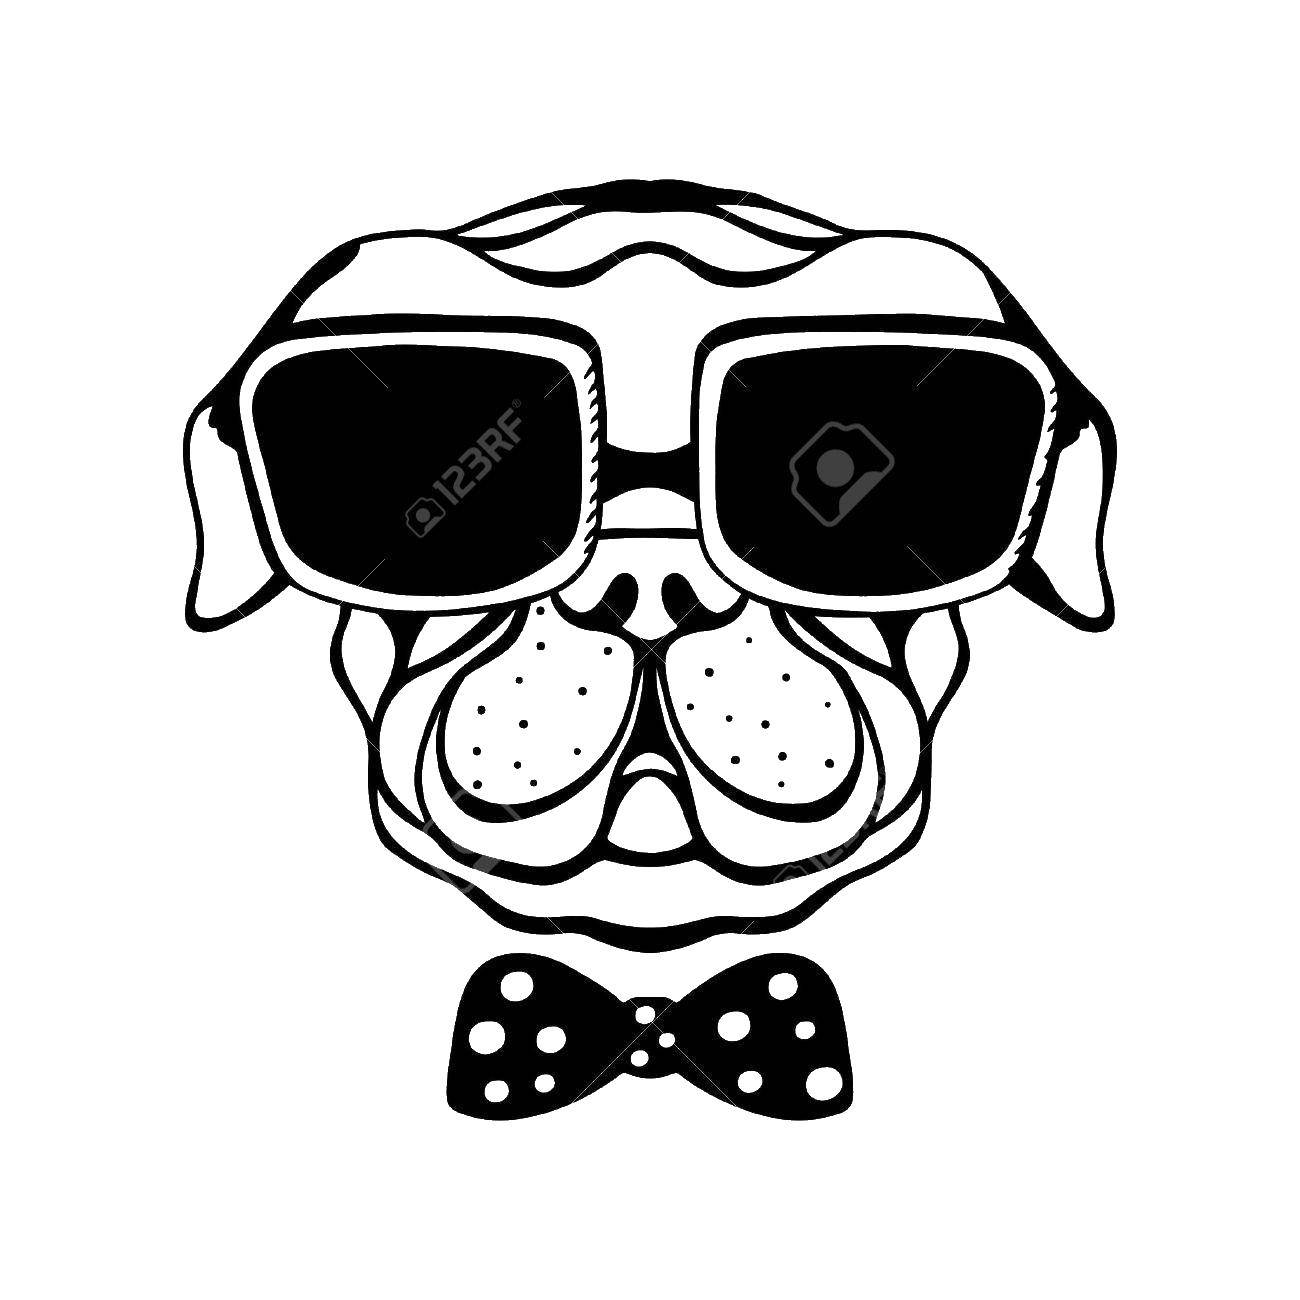 Coloring Bulldog with glasses. Category dogs. Tags:  dogs, doggy, glasses.